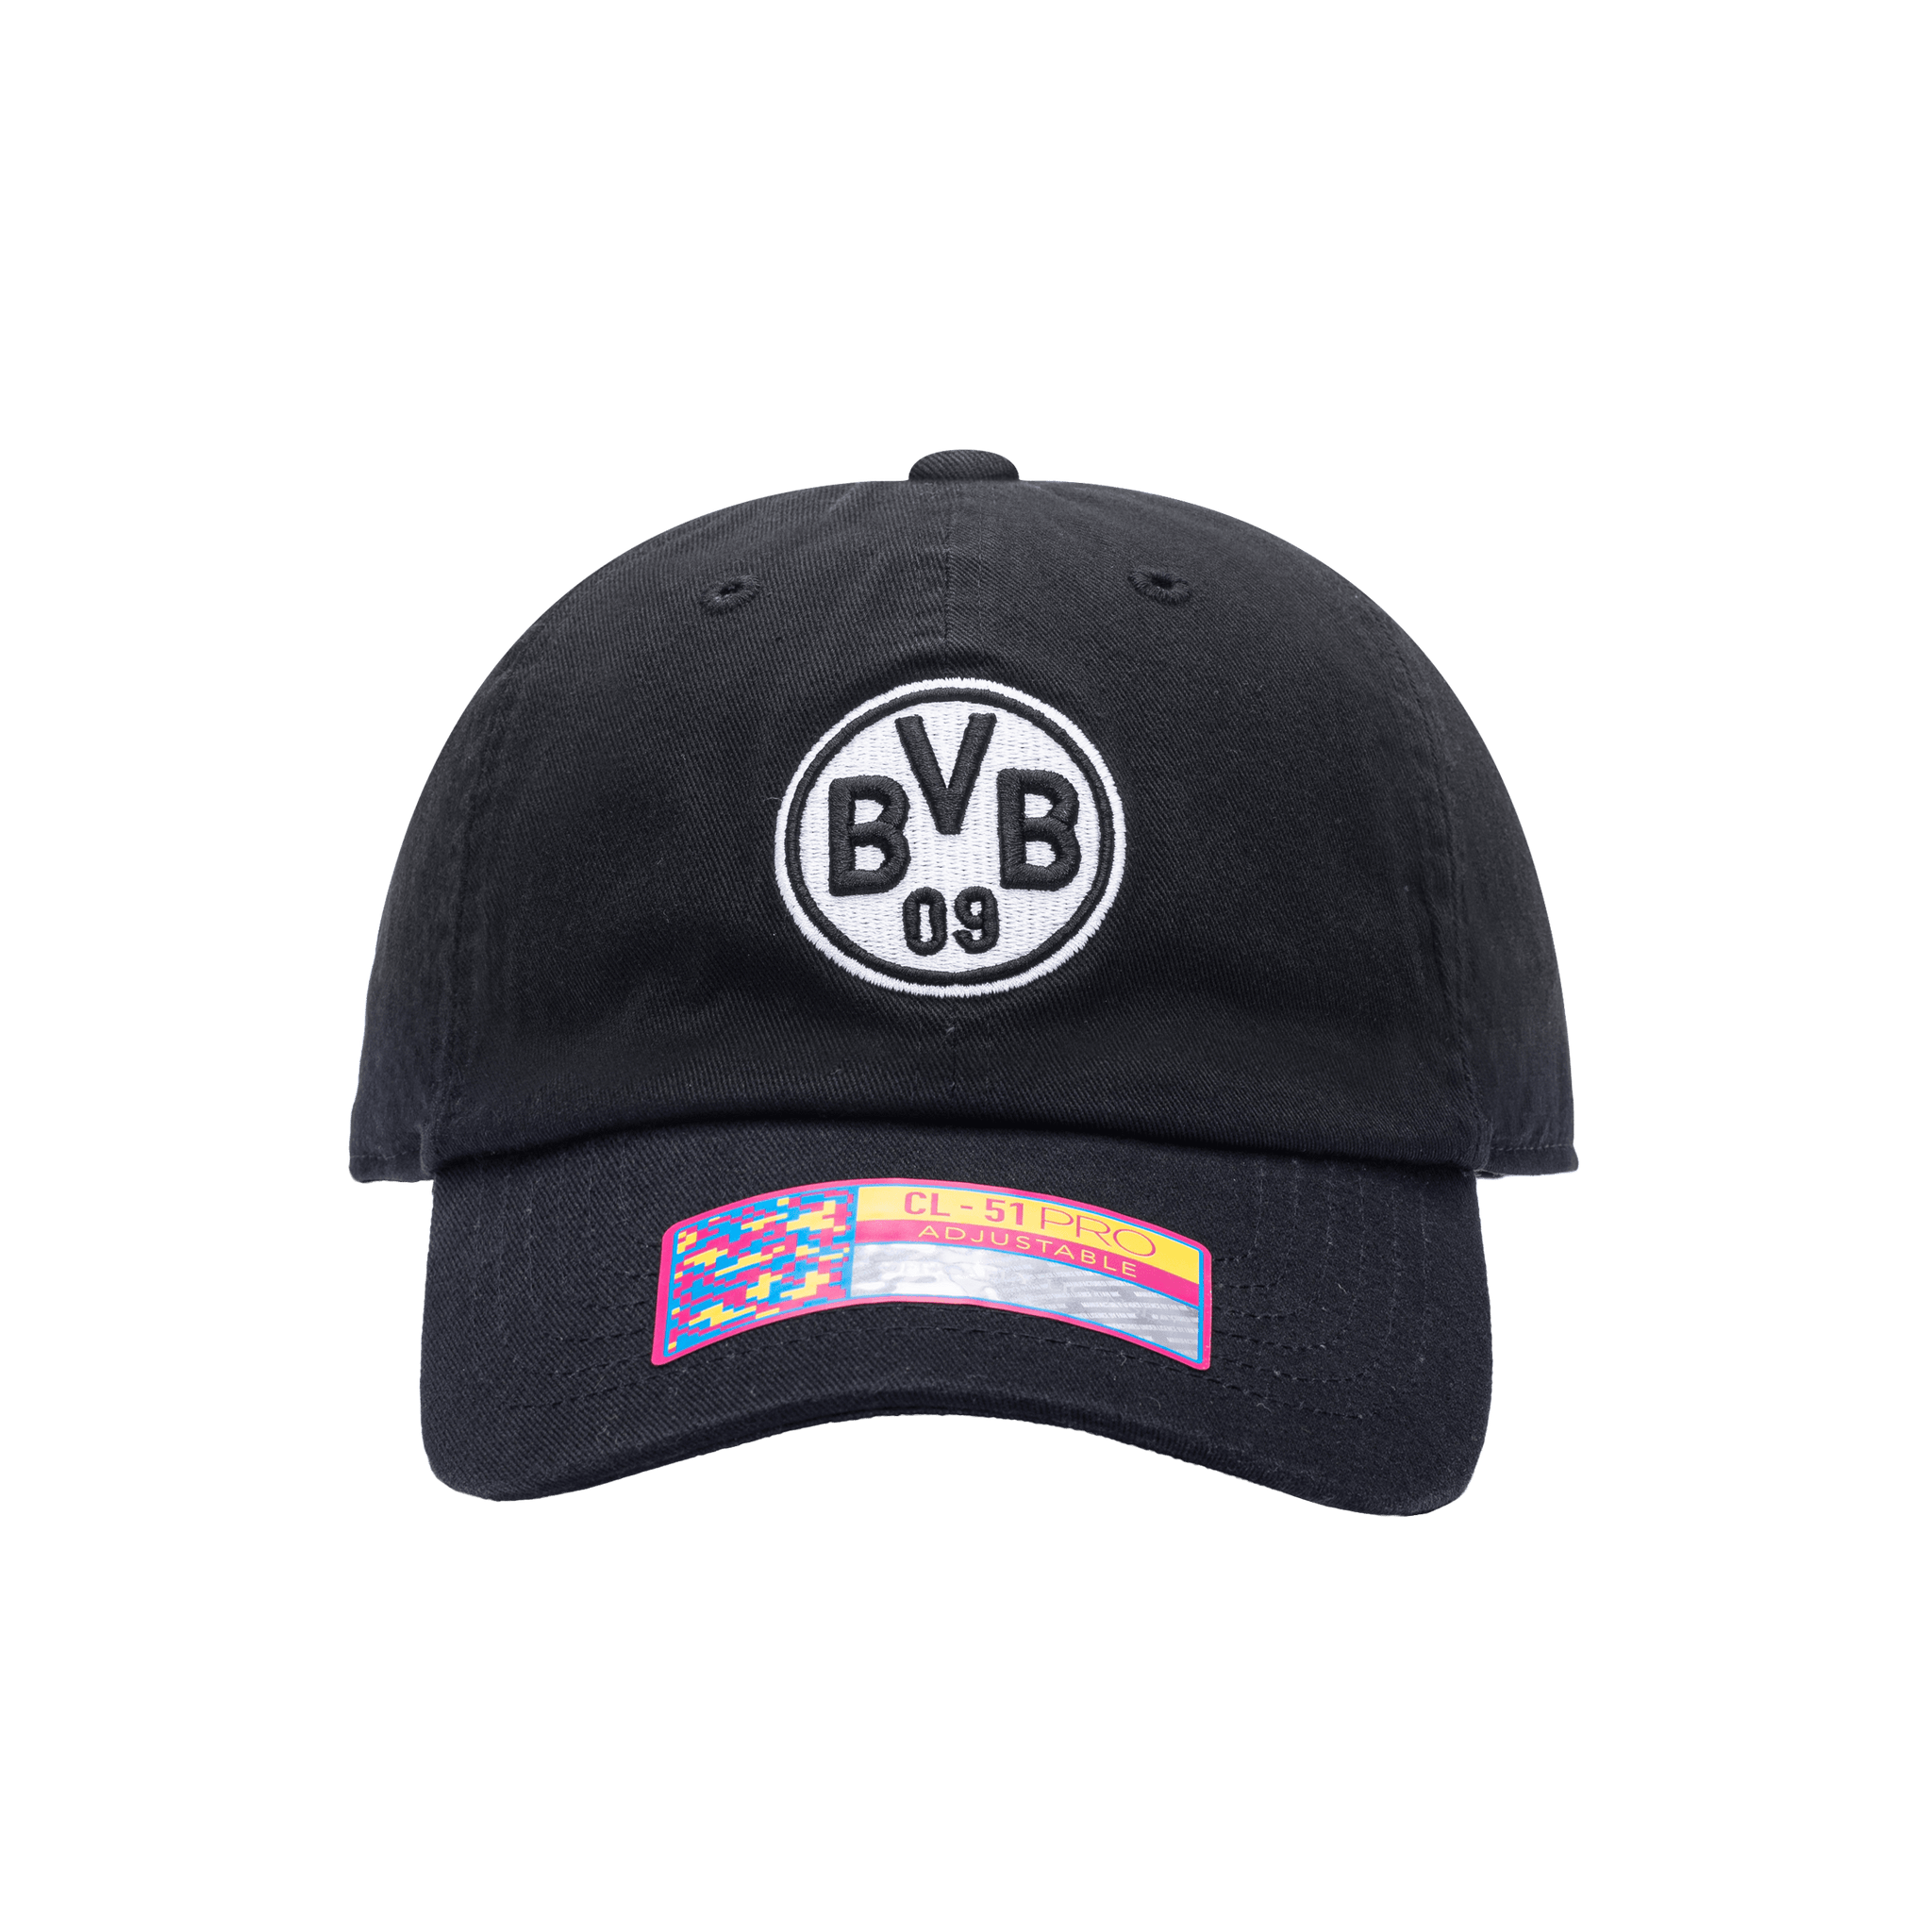 Front view of the Borussia Dortmund Hit Classic hat with low unstructured crown, curved peak brim, and buckle closure, in black.